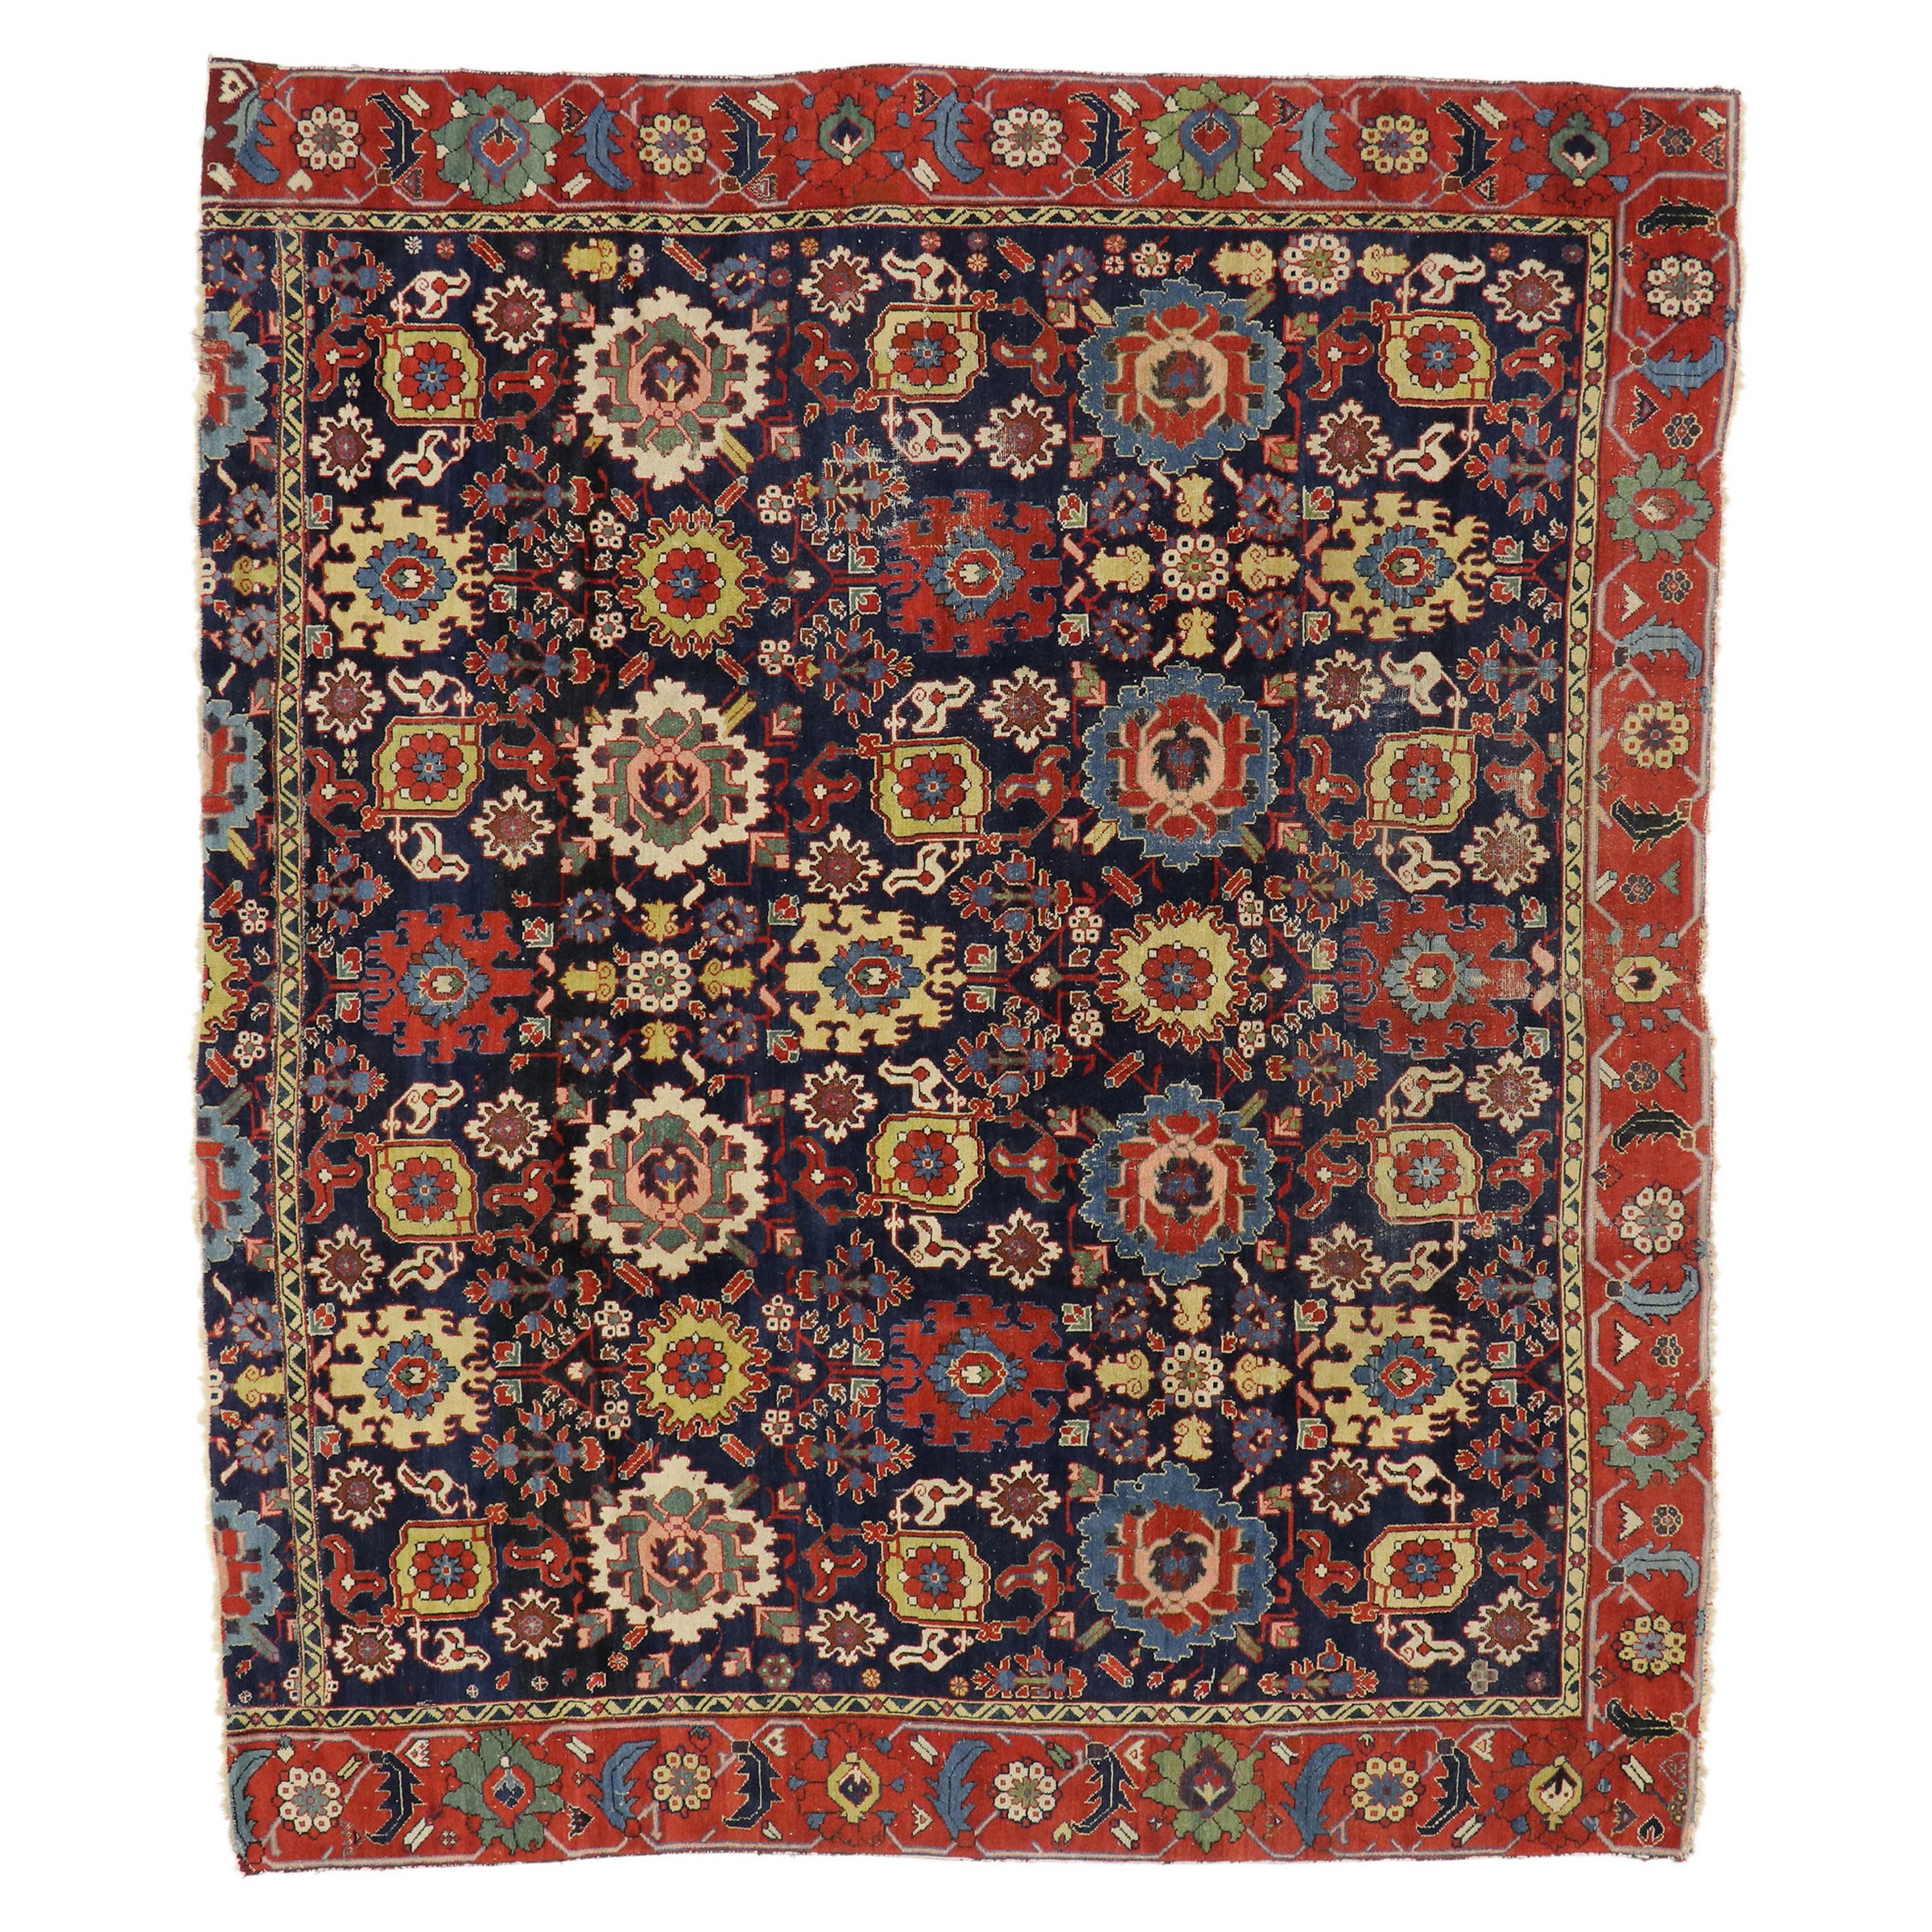 Early 19th Century Antique Caucasian Azerbaijan Rug with Harshang Design For Sale